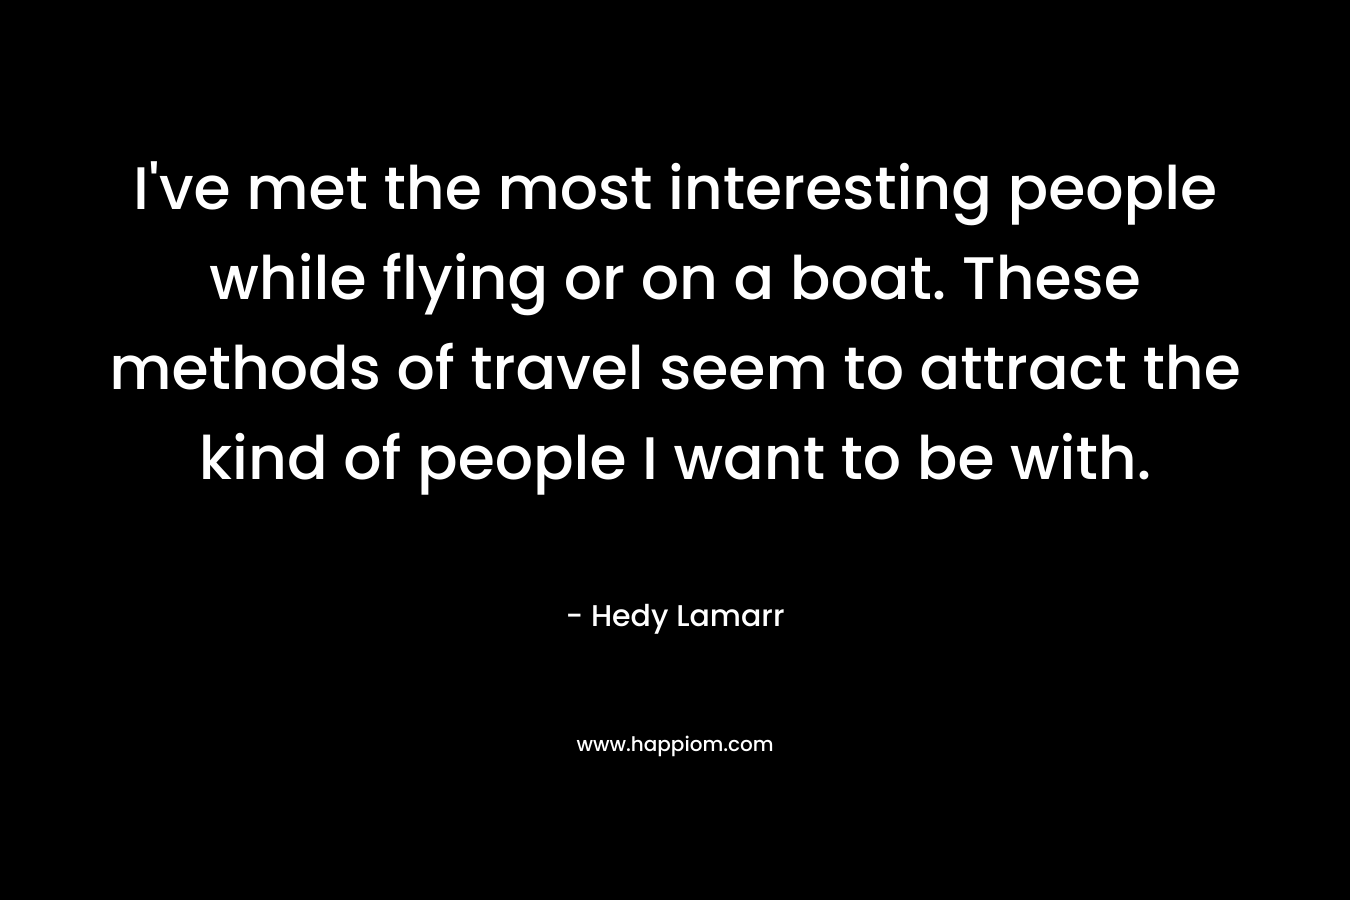 I’ve met the most interesting people while flying or on a boat. These methods of travel seem to attract the kind of people I want to be with. – Hedy Lamarr